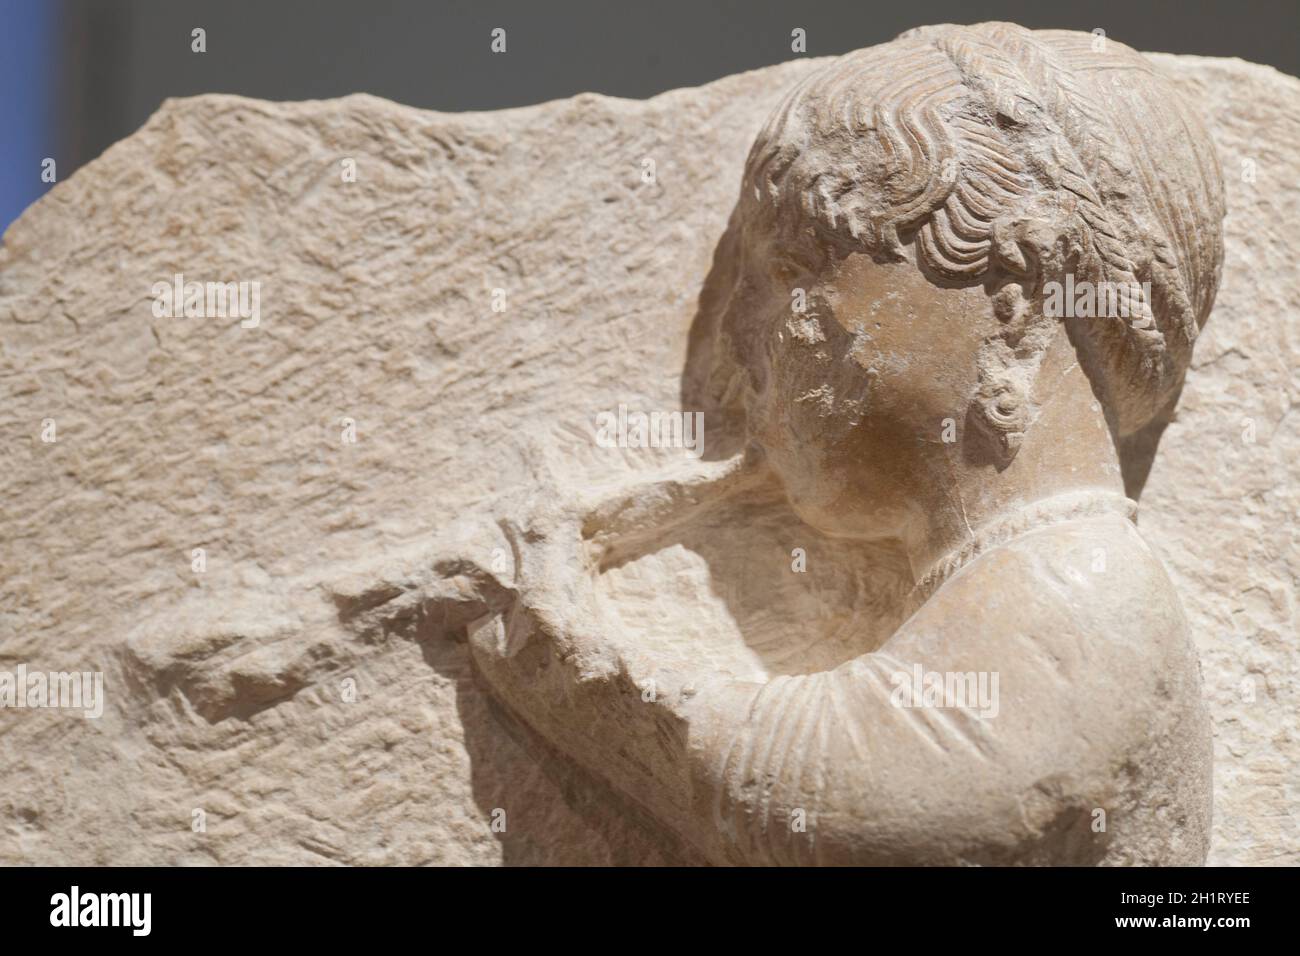 Madrid, Spain - March 6th 2021: The flute player woman from Osuna. Iberian culture high relief. MAN, Madrid Stock Photo